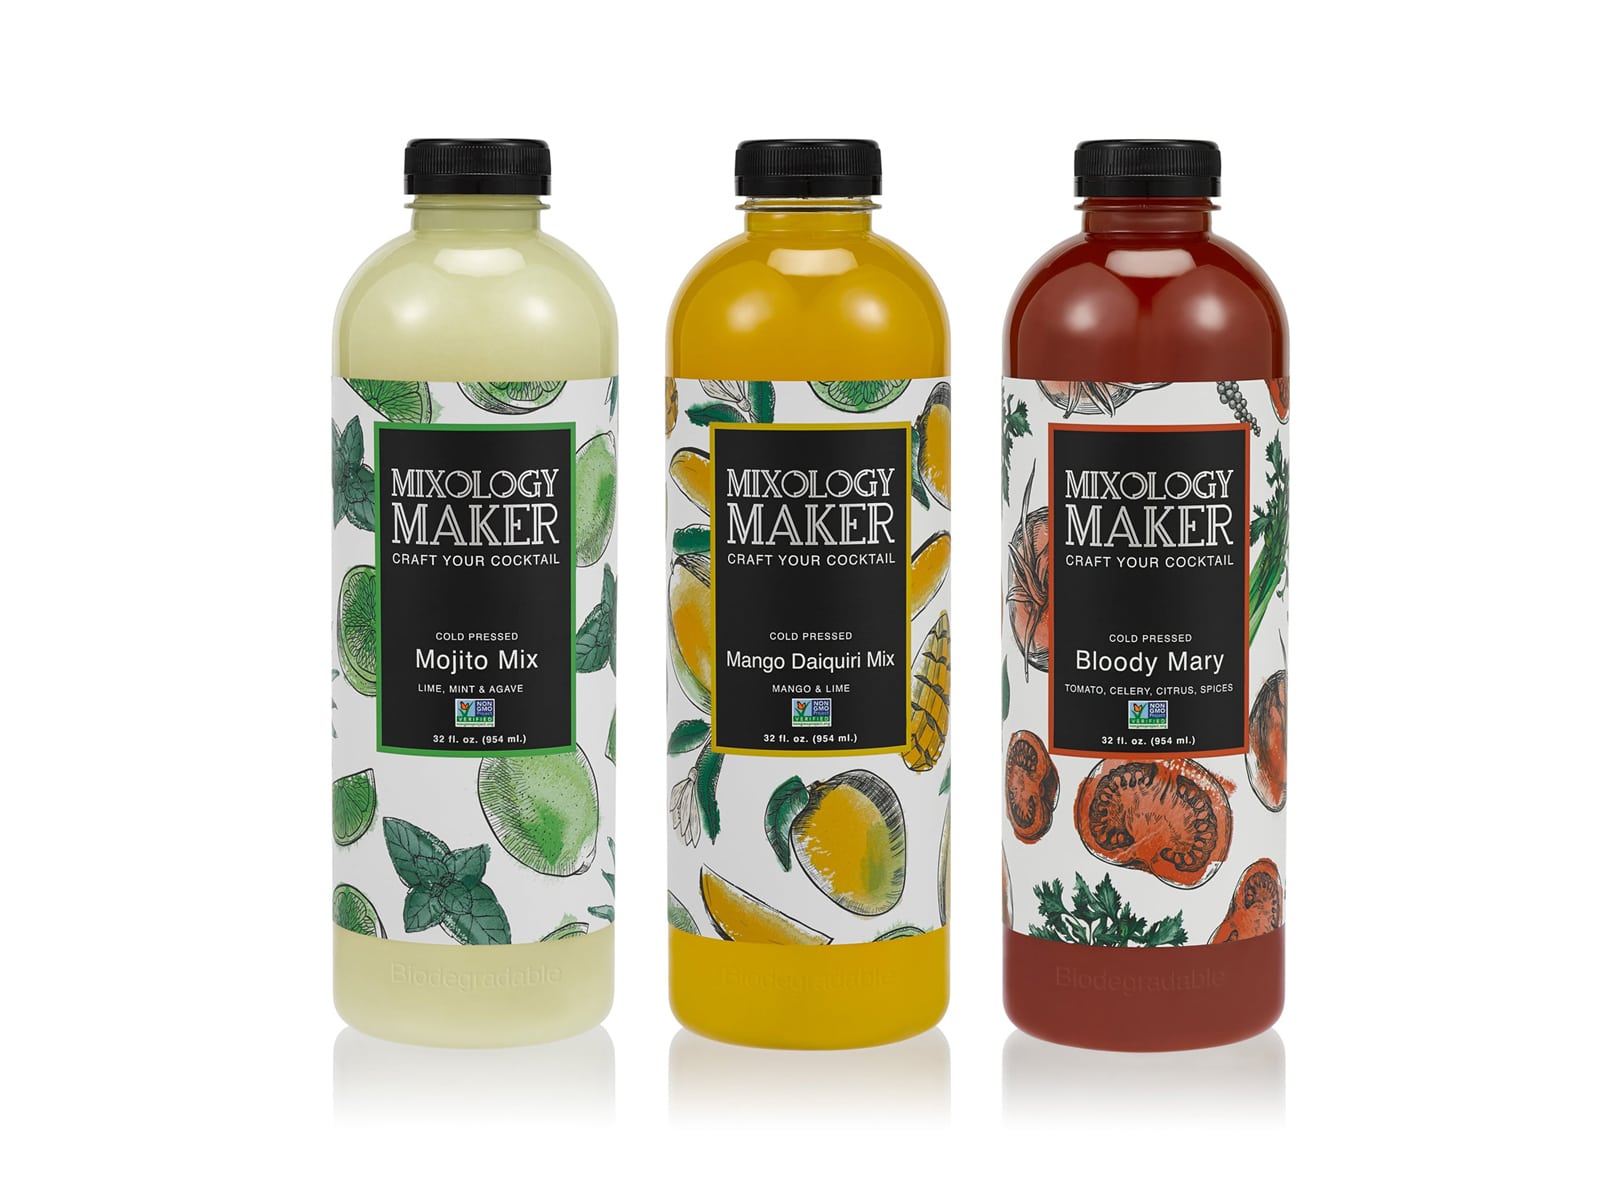 Mixology Maker drink packaging product design showing row of bottles with sleek logo and hand drawn fruits on each label.